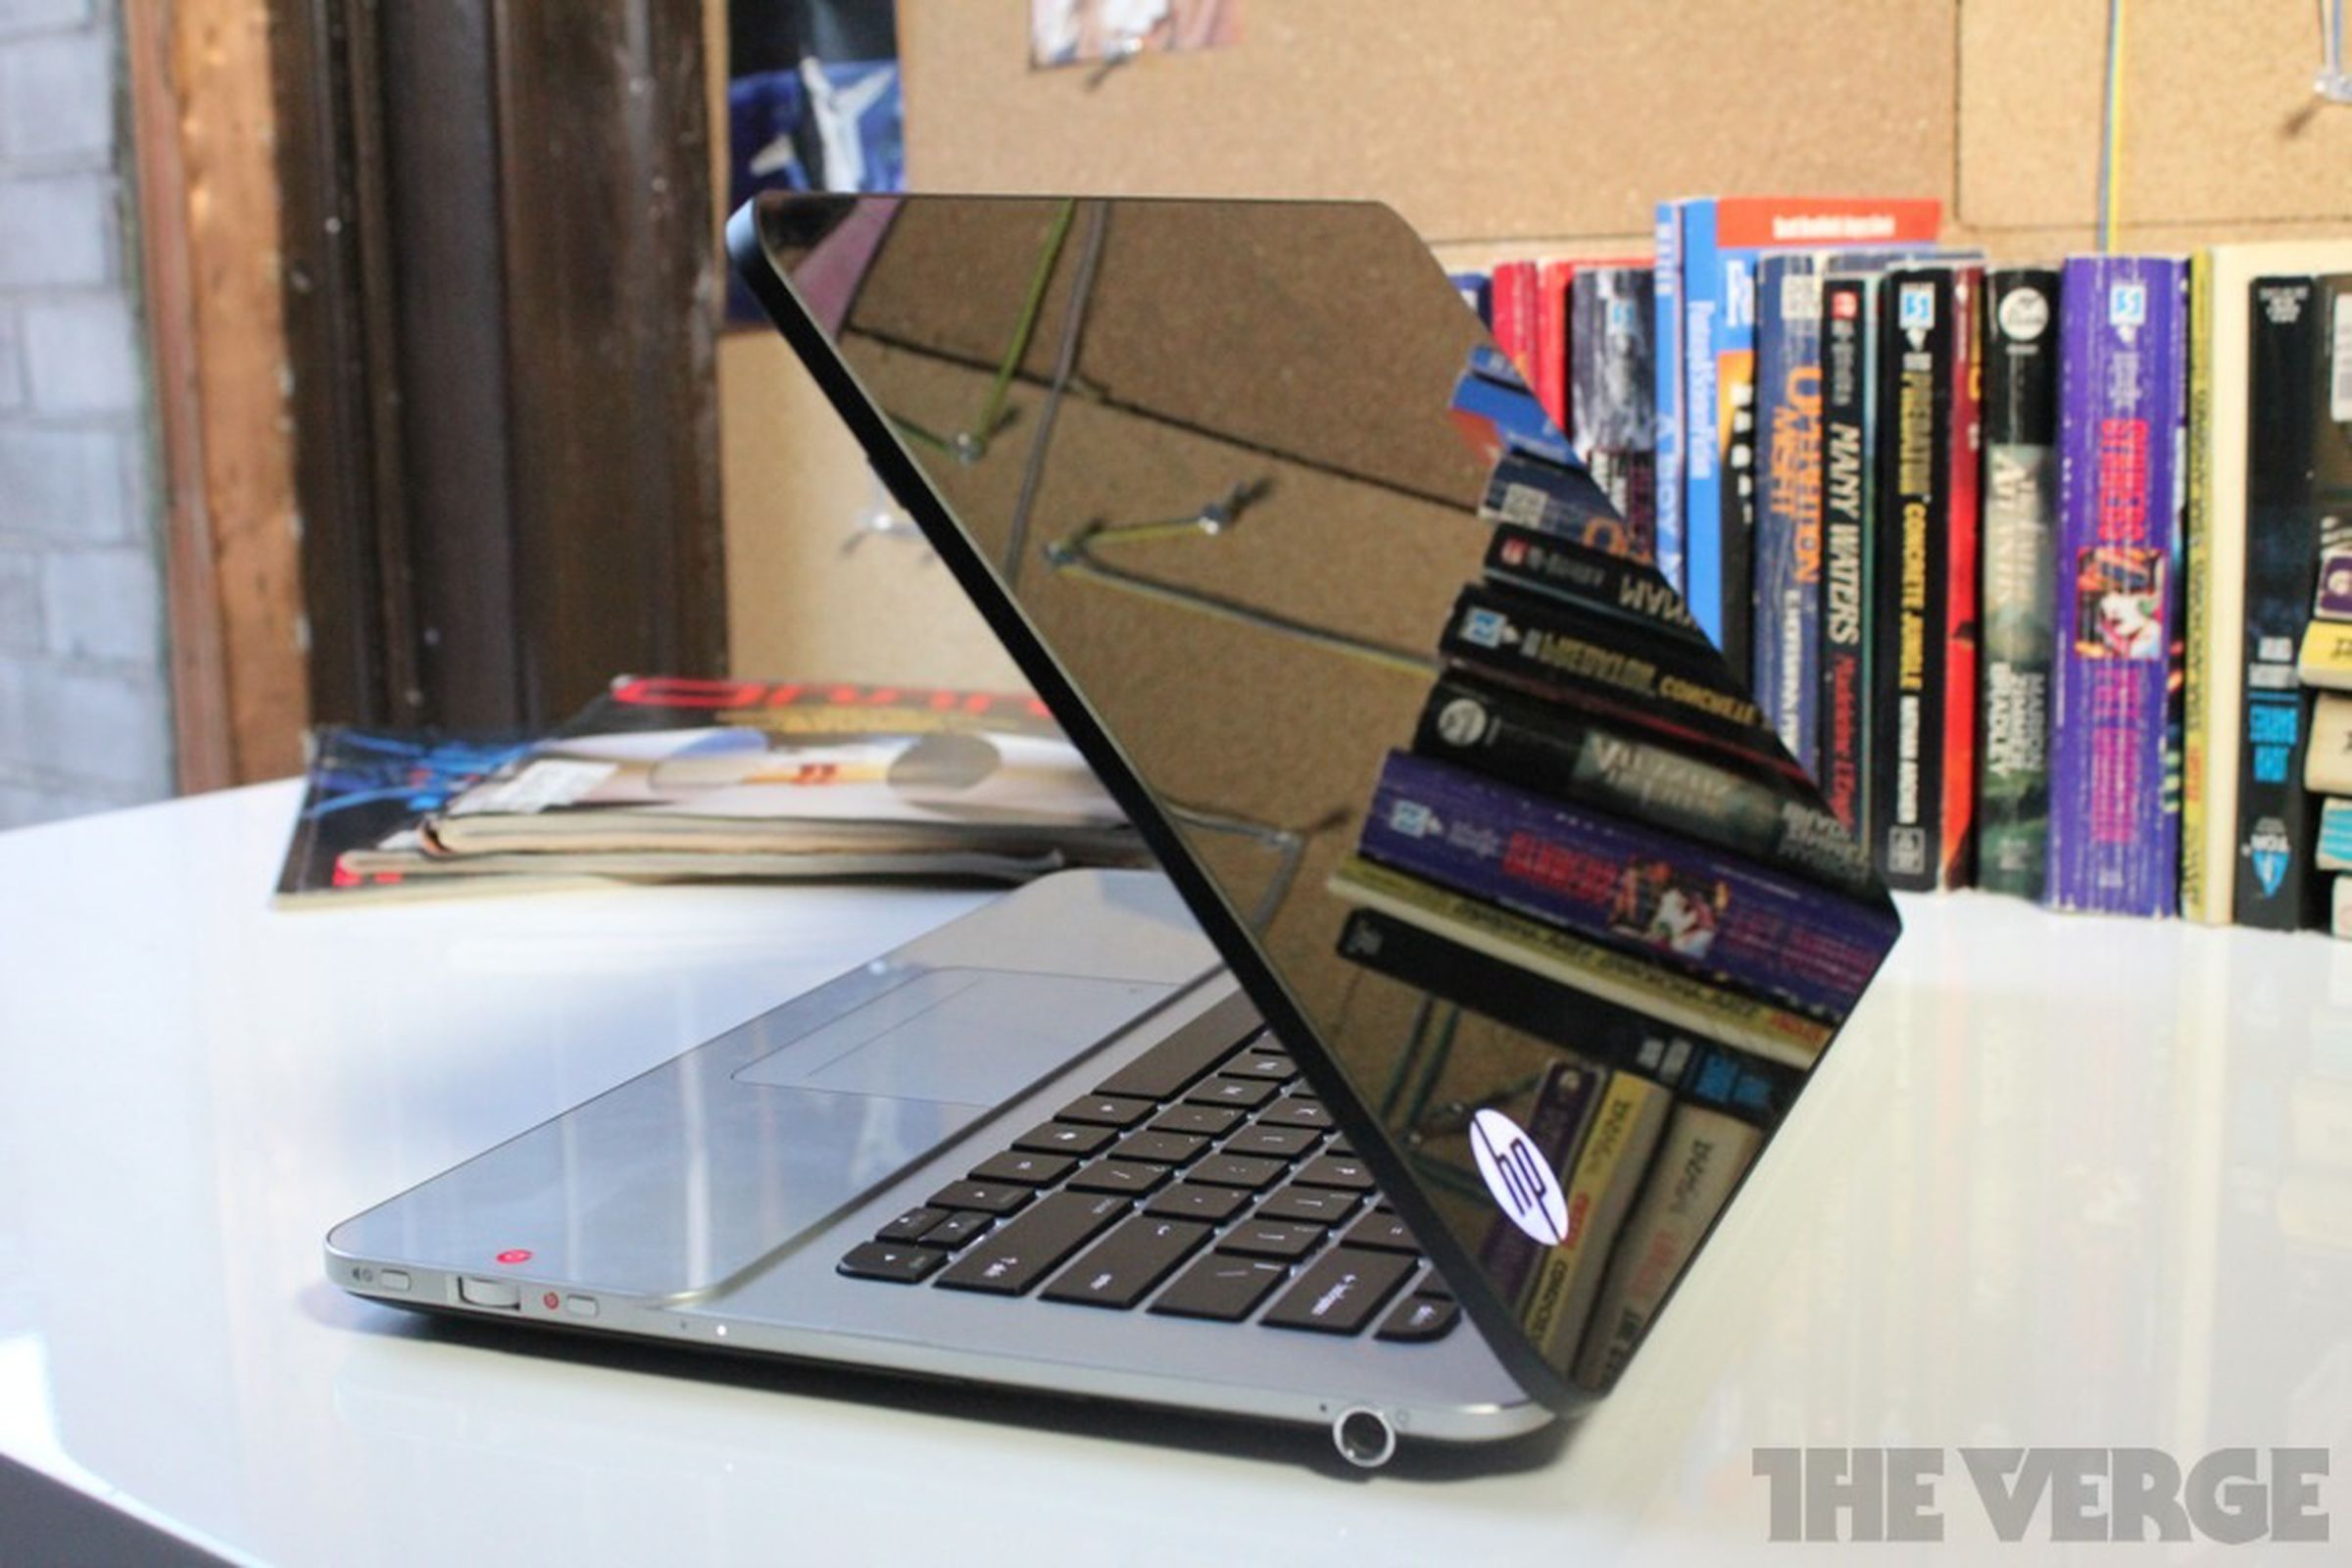 Gallery Photo: HP Envy 14 Spectre hands-on pictures 